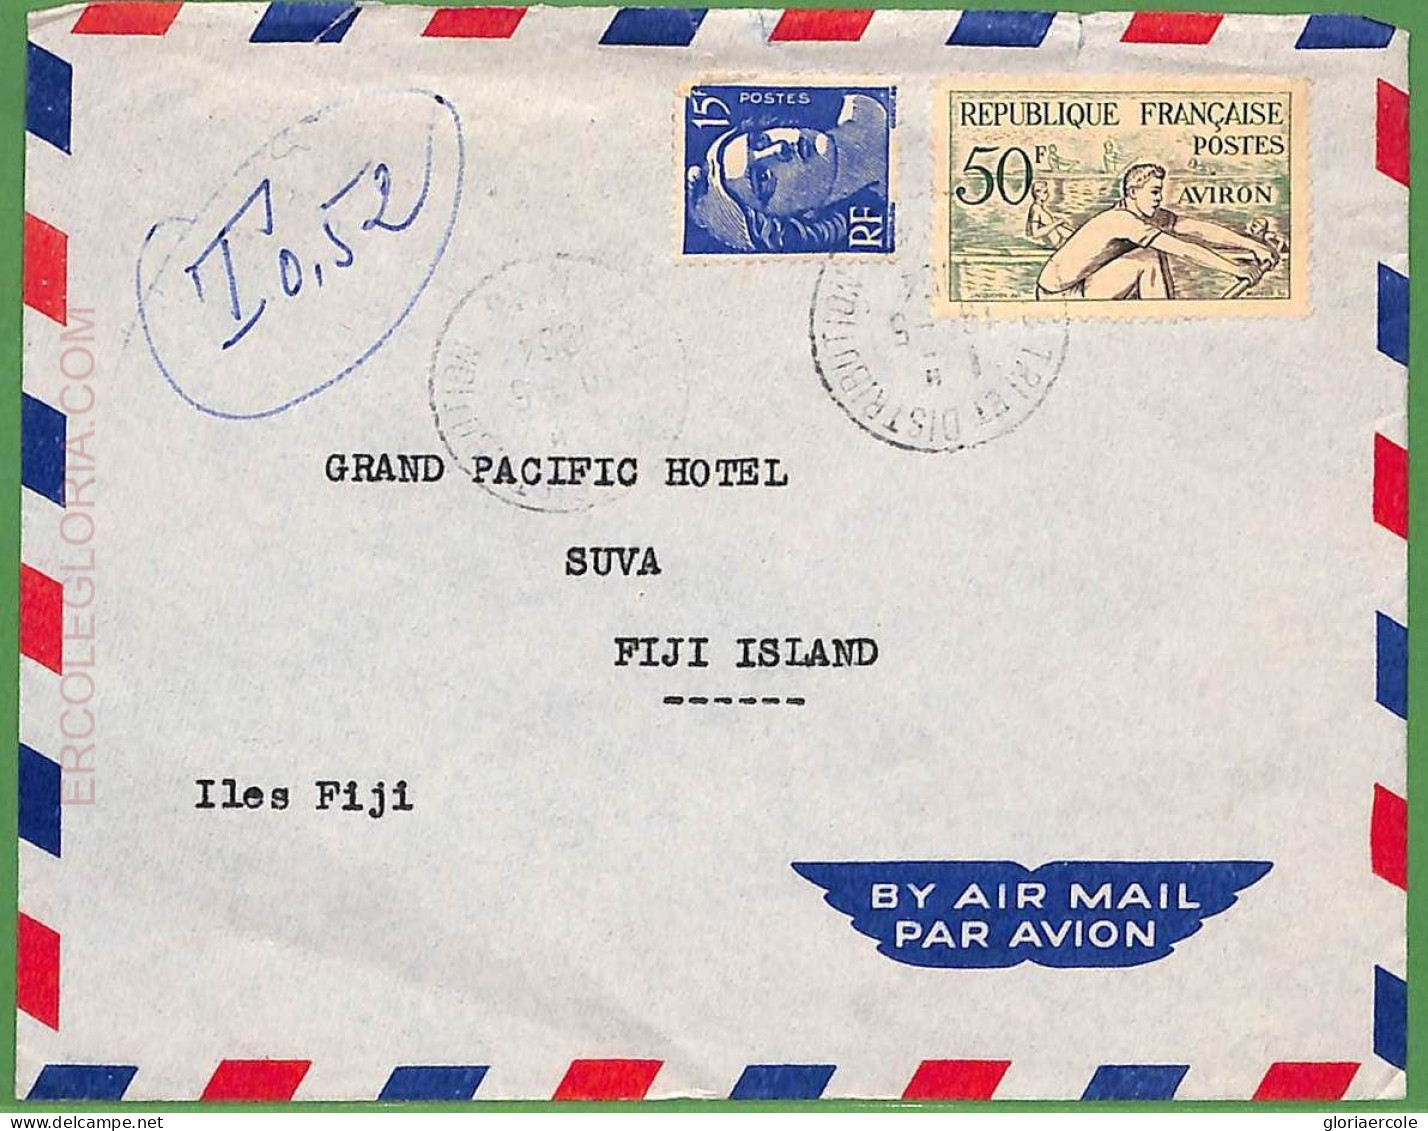 Af3734 - FRANCE - POSTAL HISTORY - AIRMAIL COVER To FIJI  - ROWING Canoes - 1954 - Canoa